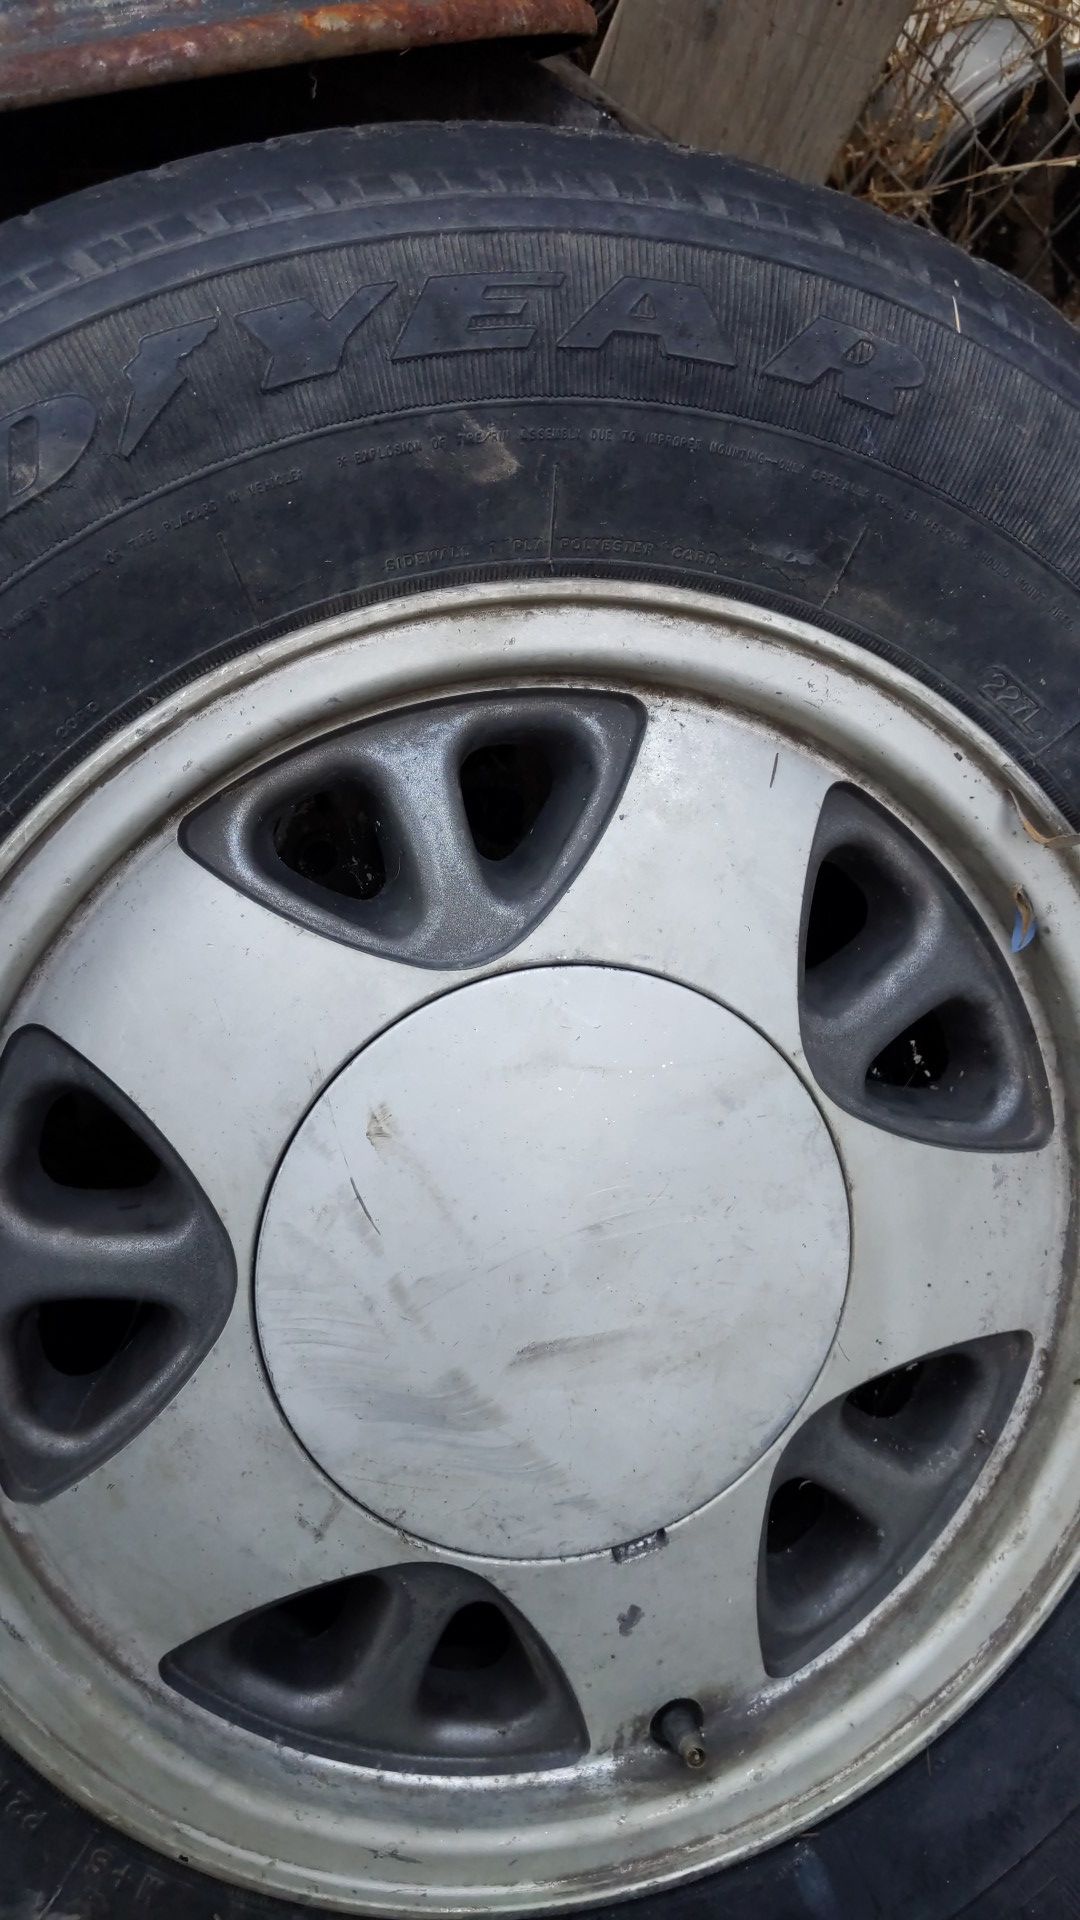 88 to 98 Chevy rims